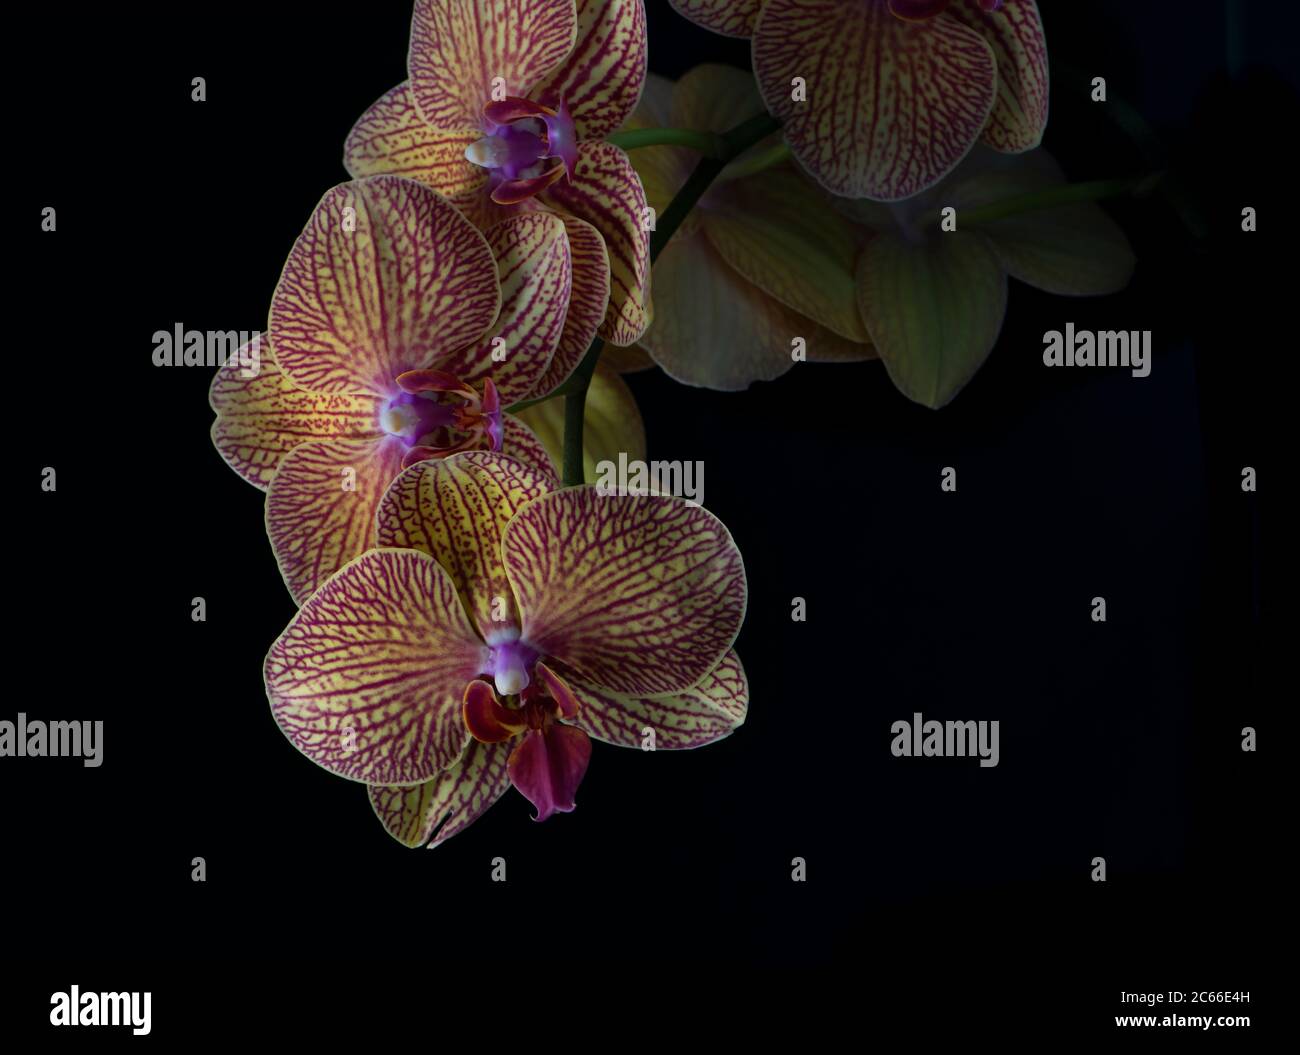 A Phalaenopsis Orchid, or commonly known as Moth Orchid, on a black background Stock Photo